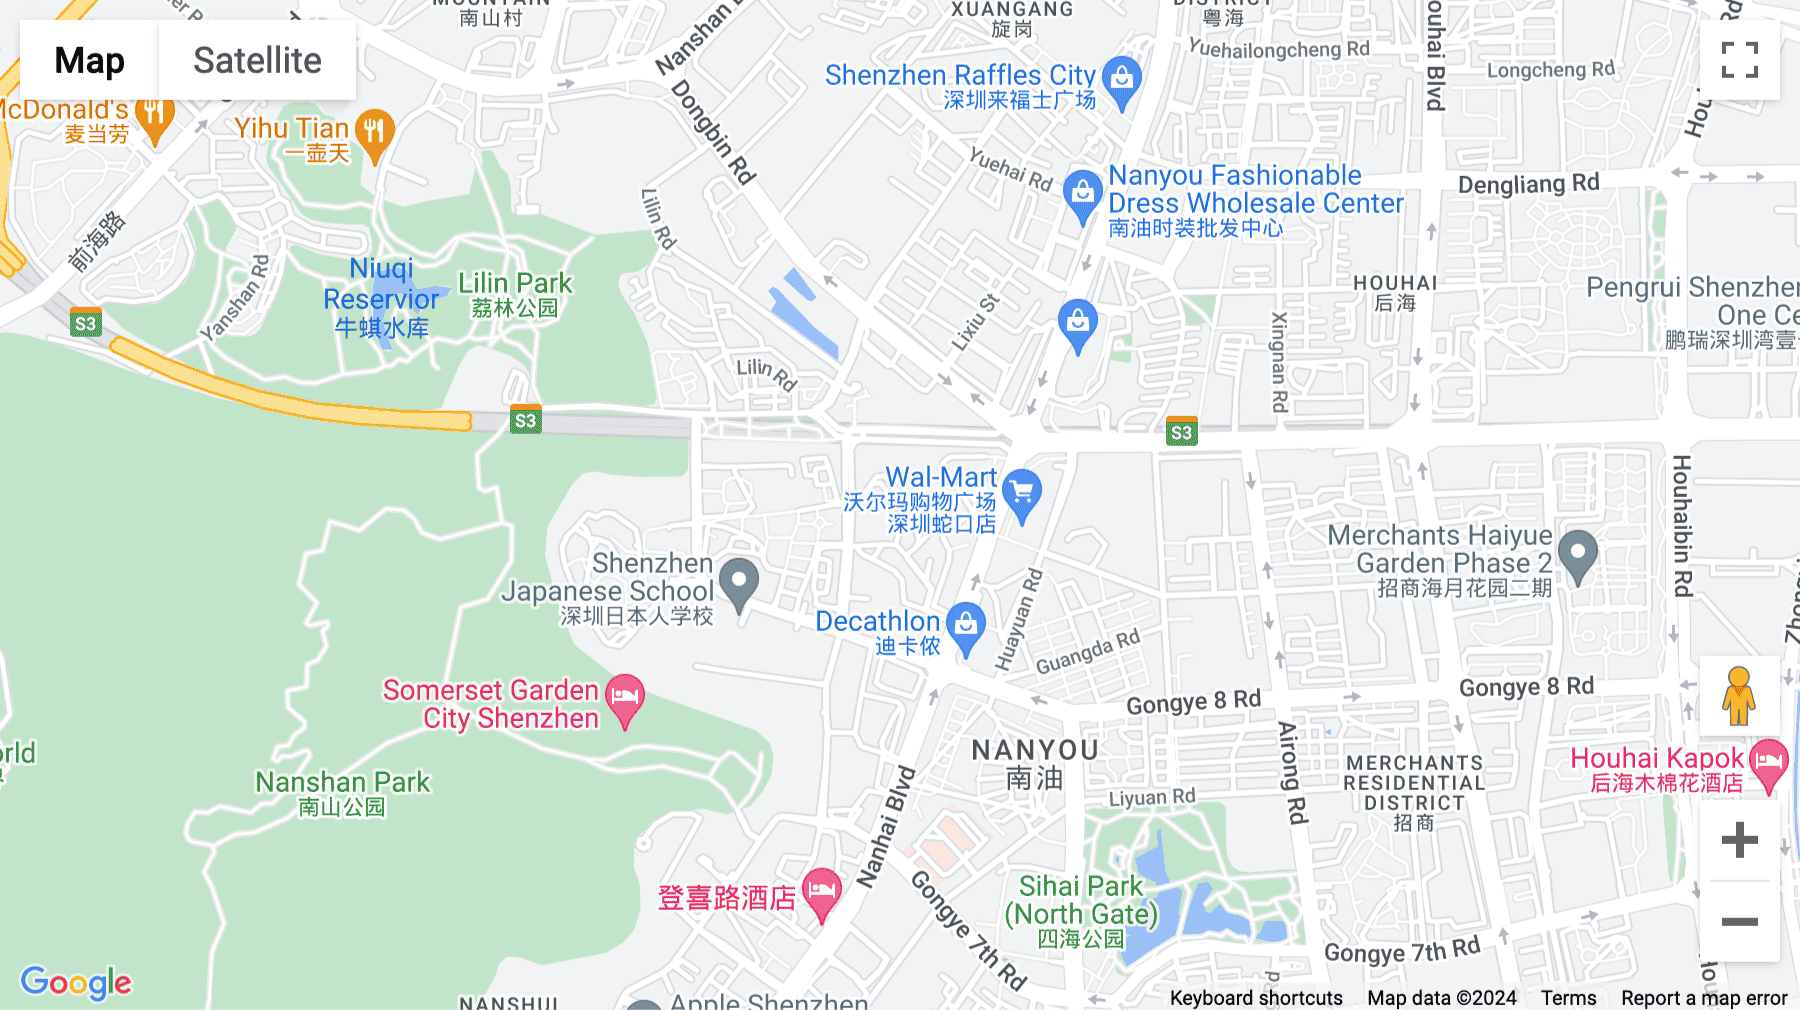 Click for interative map of 5th Floor, Building 5, Fantasia Meinian Plaza, Room 501-505, Nanshan District, Shenzhen